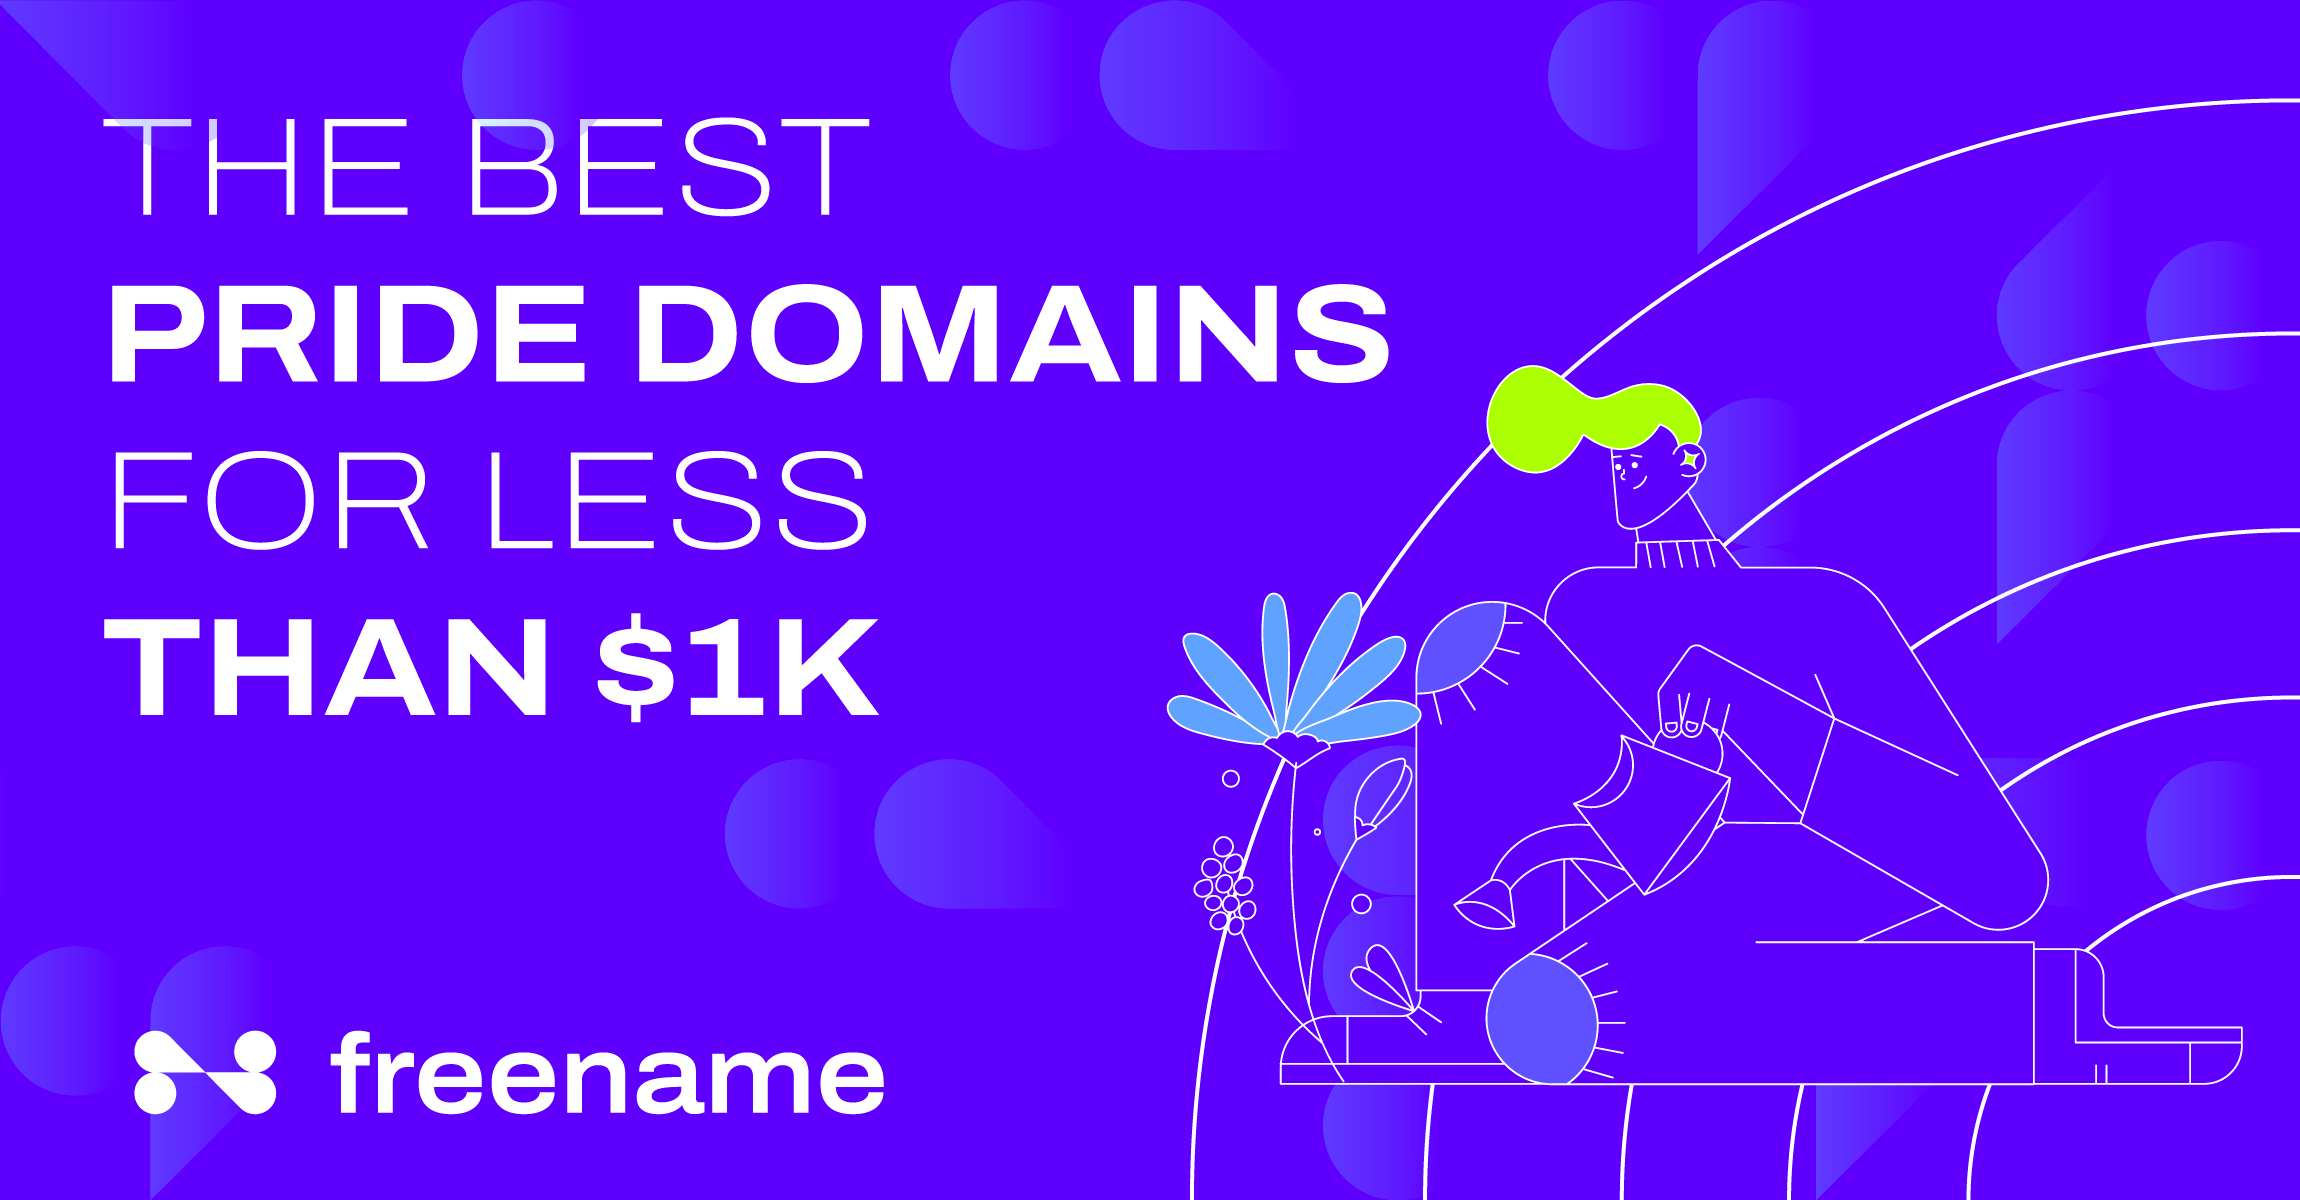 The Best Pride Domains for less than 1k